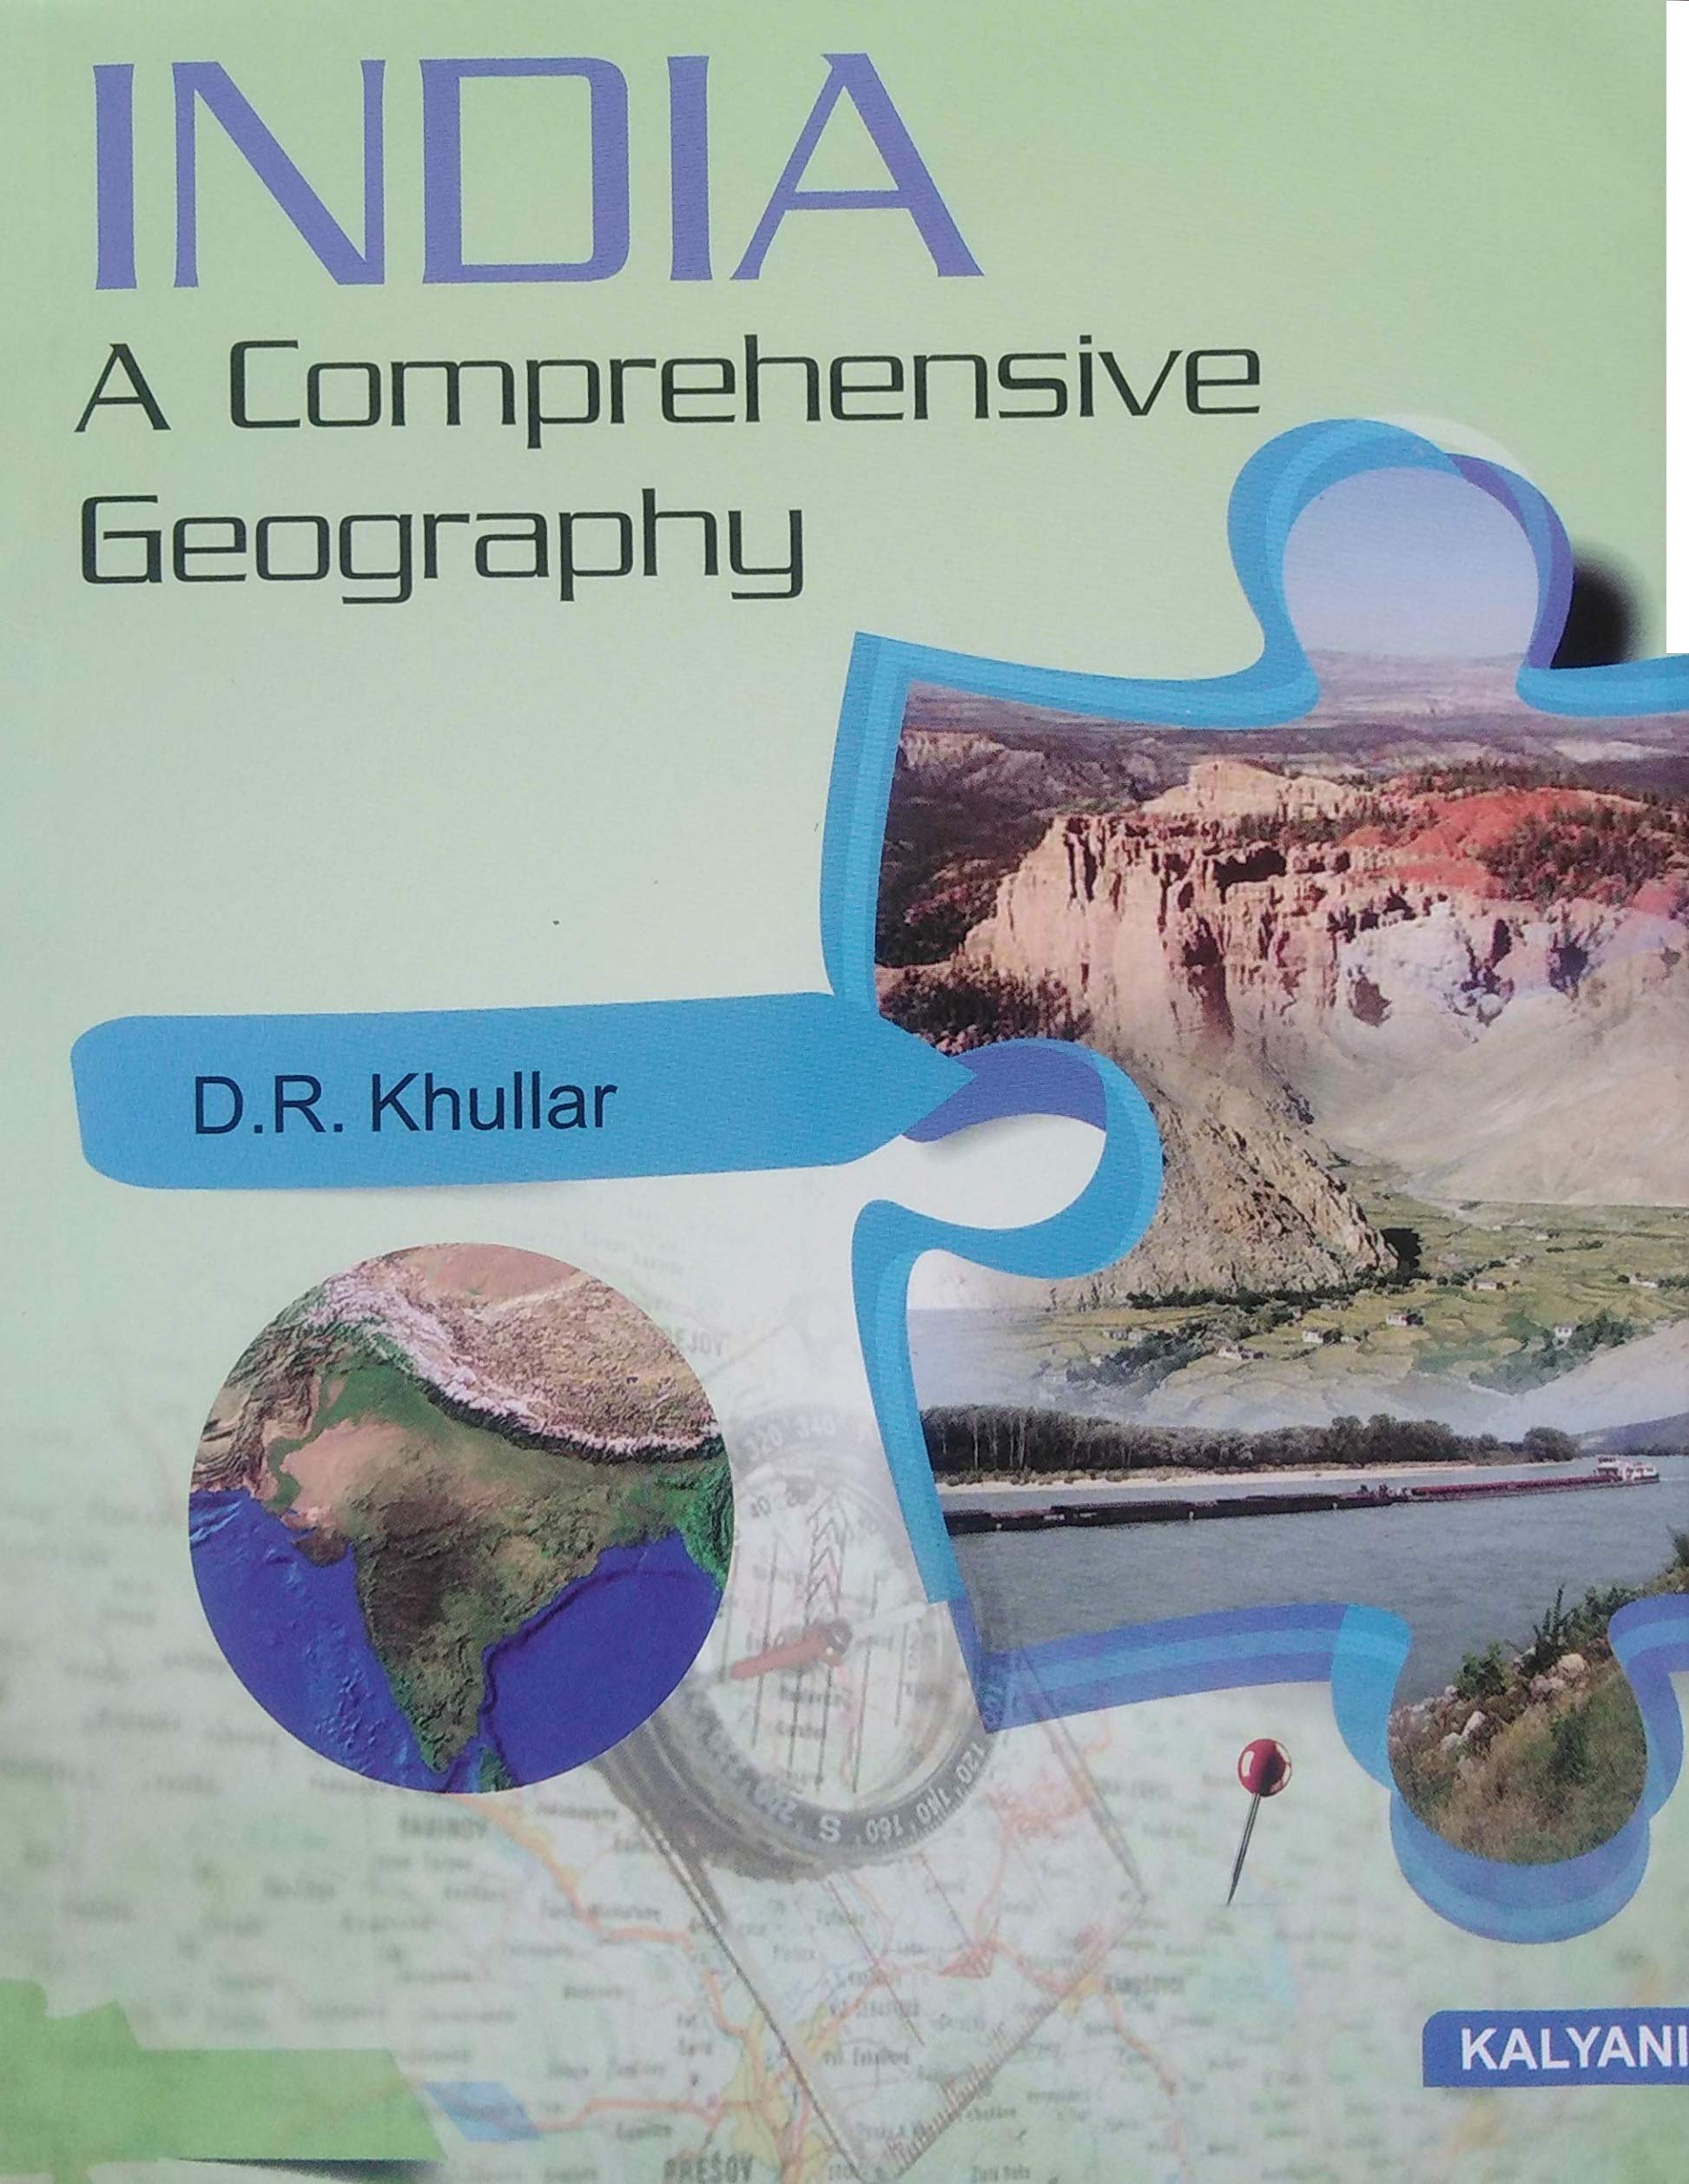 India a Comprehensive Geography